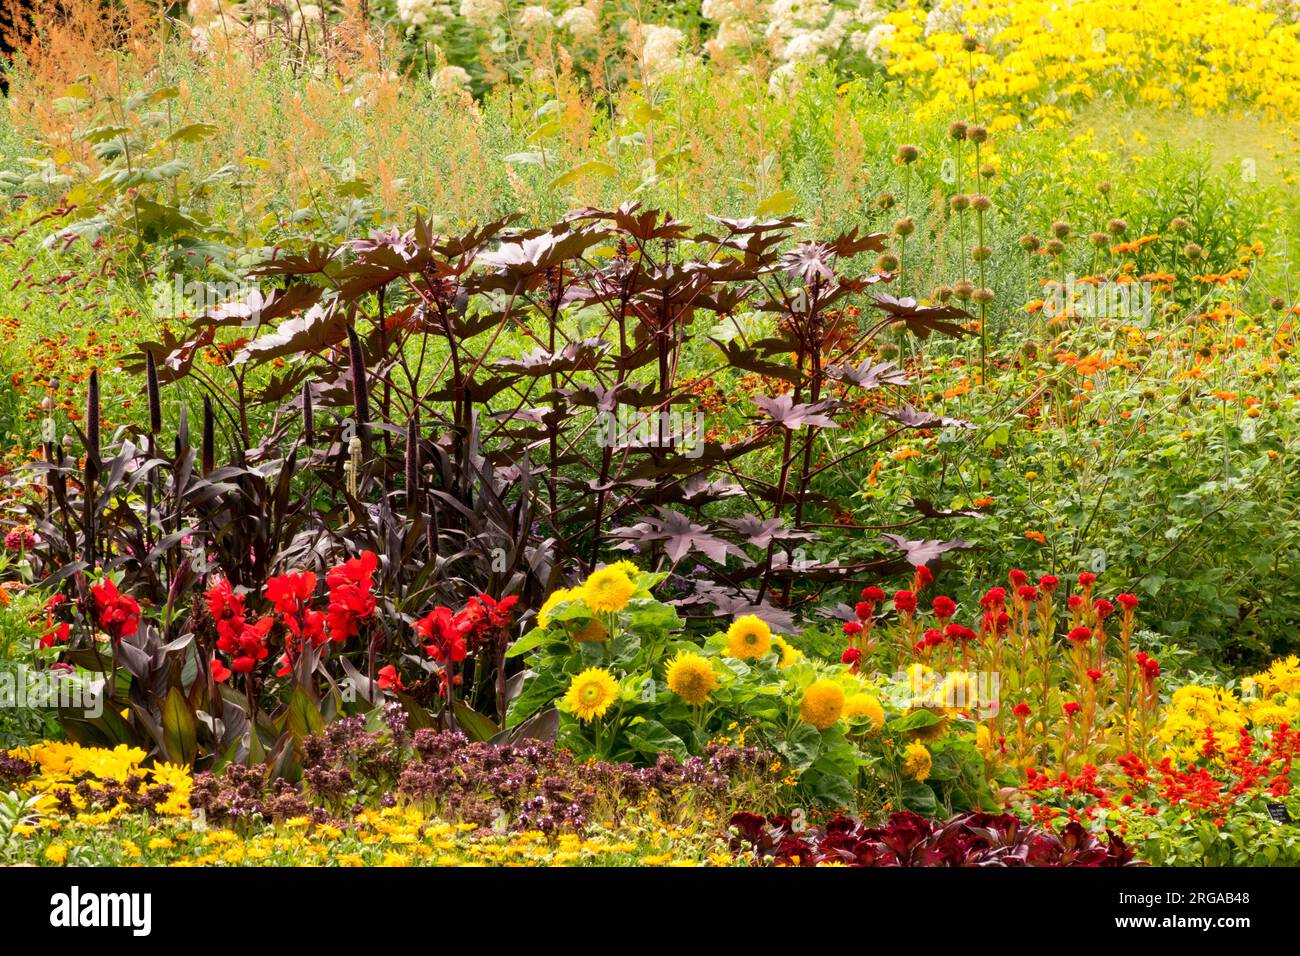 Castor oil plant colourful bedding plants in a summer garden Canna, Sunflowers, Pearl Millet, Combination flowers Stock Photo